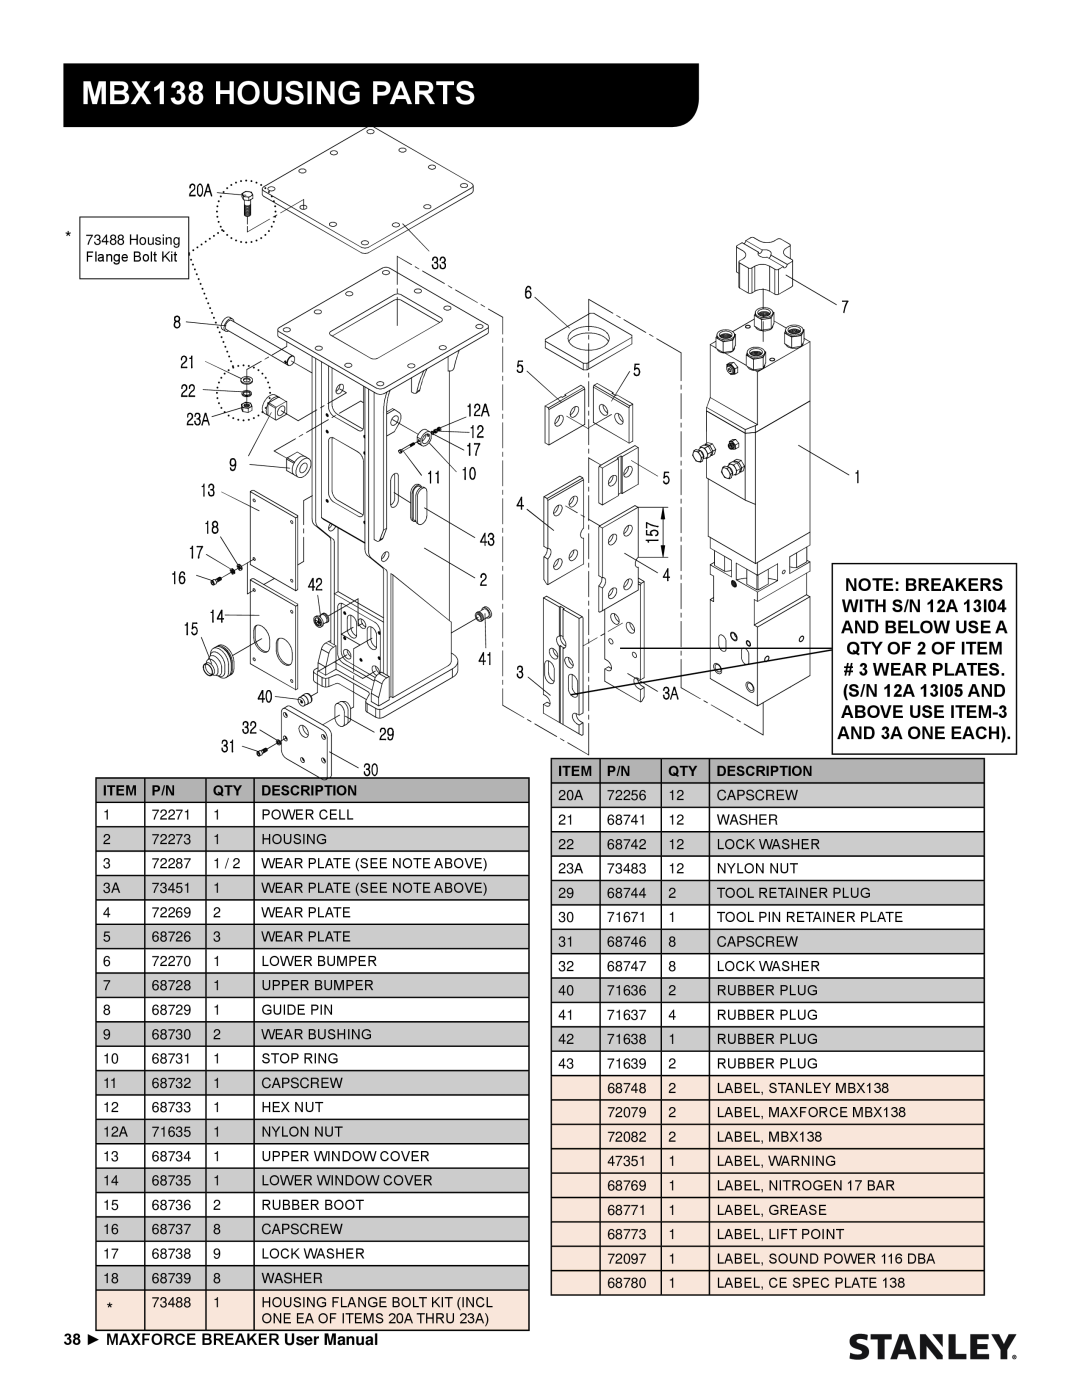 Stanley Black & Decker MBX138 thru MBX608 MBX138 HOUSING PARTS, Note: Breakers, WITH S/N 12A, And Below Use A, Item 